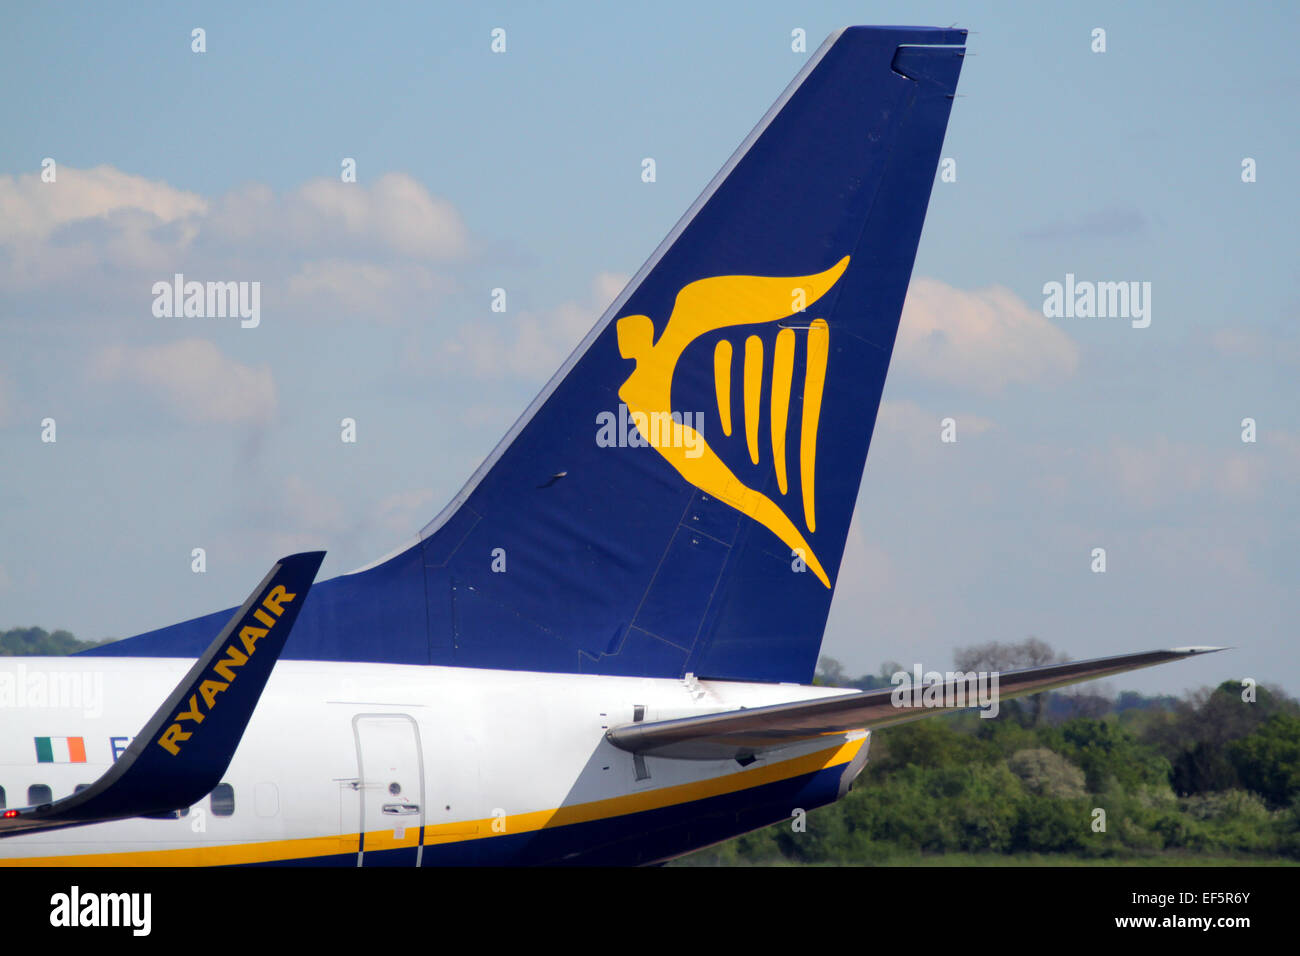 RYAN AIR BOEING 737-8AS AIRCRAFT TAIL FIN MANCHESTER AIRPORT ENGLAND 14 May 2014 Stock Photo